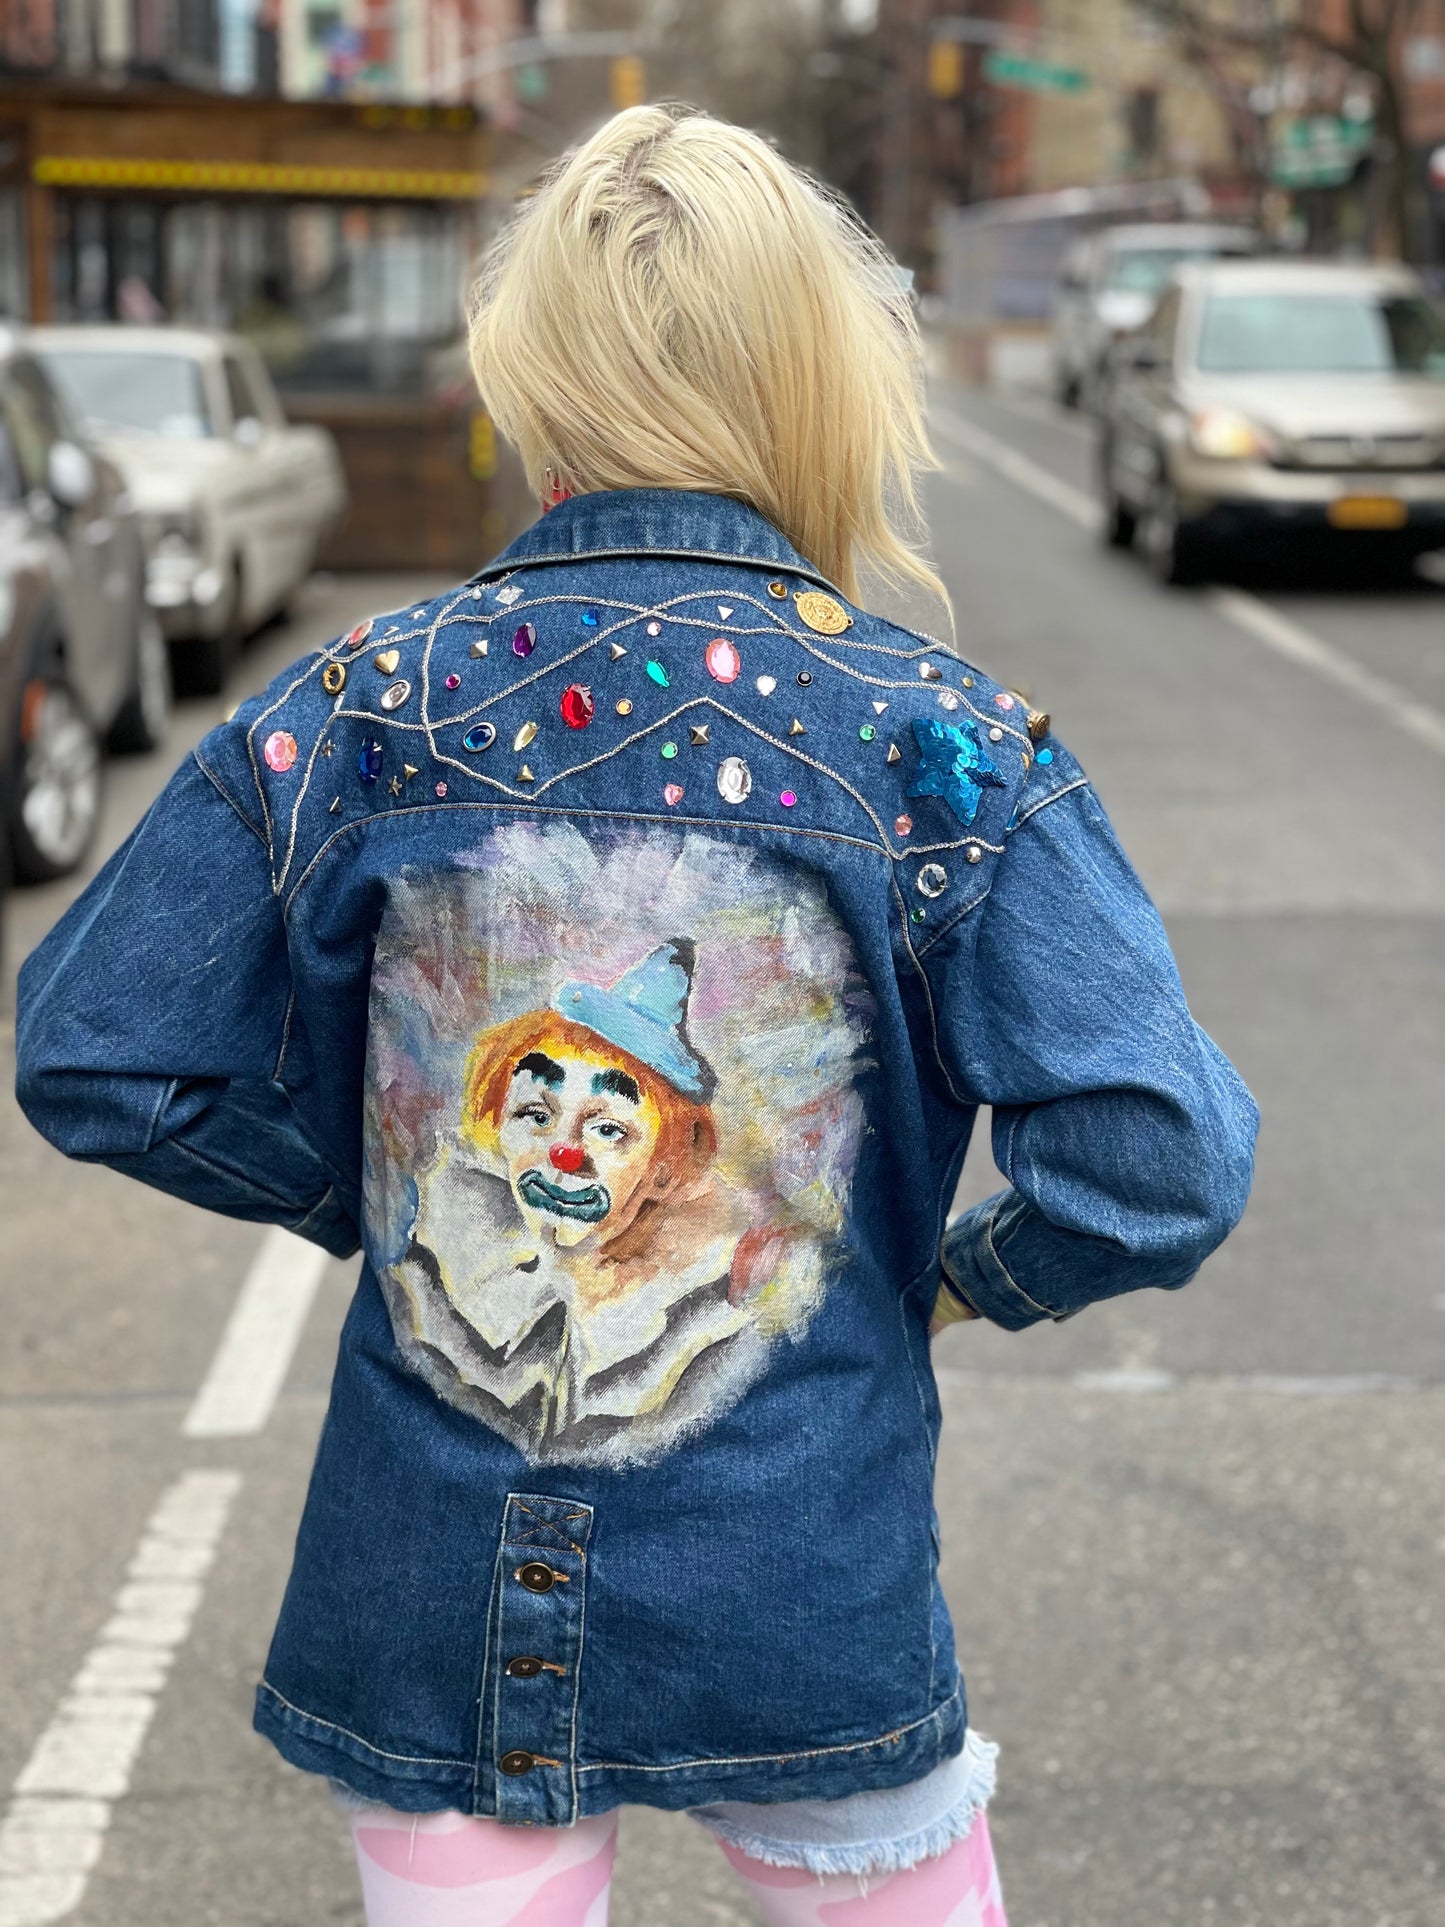 Vintage 80s Hand Painted Clown Bedazzled Jean Jacket - Spark Pretty